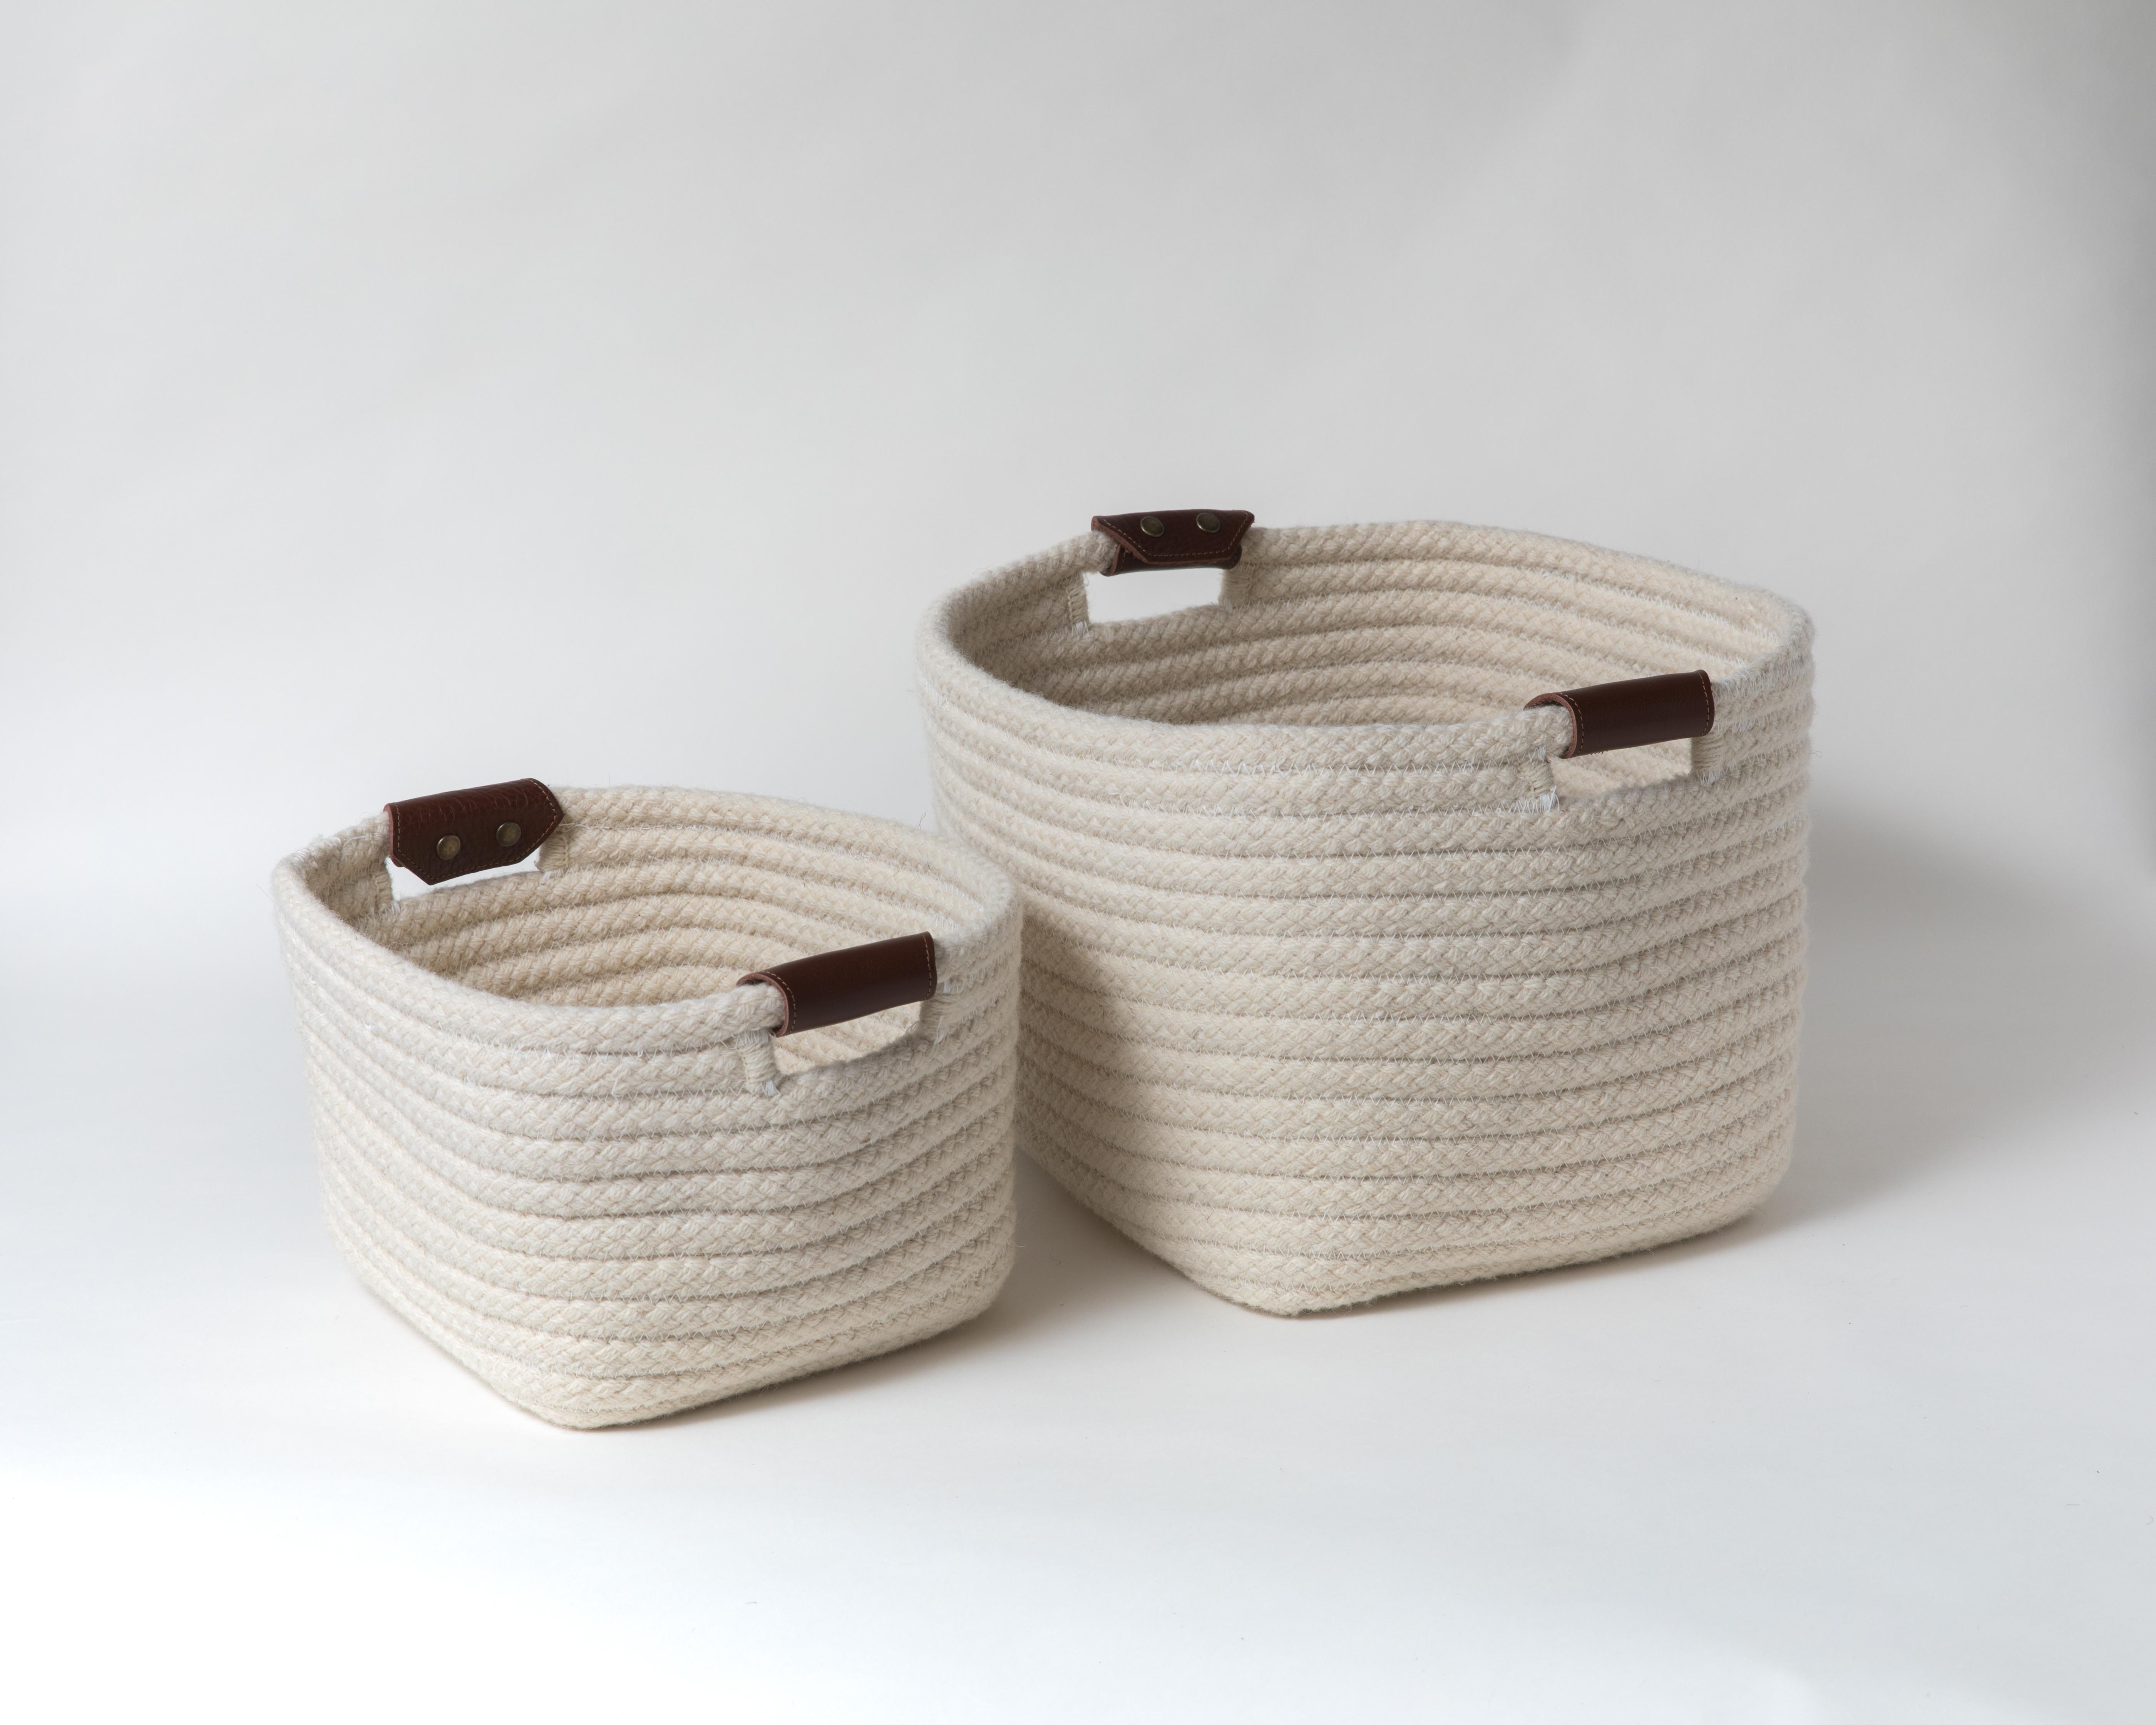 Simple and sturdy woven basket in a rectangular design. Cream, natural un-dyed wool is accented with leather handles. Handle color options are brown, black and natural. 

Designed by Meredith Thayer in her South Boston studio and made to order in